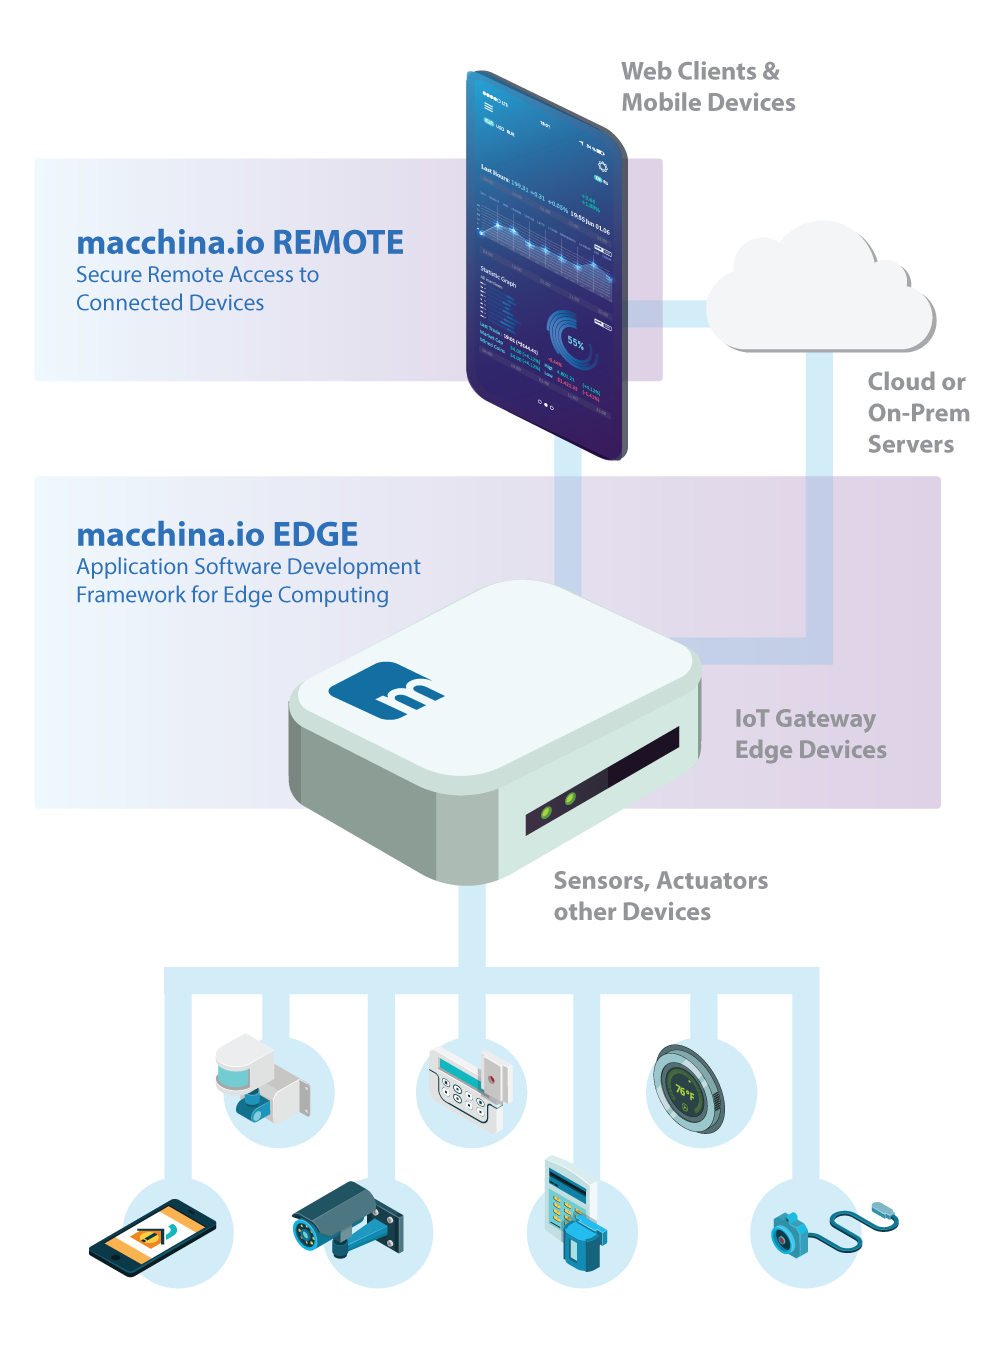 Info graphic - IoT Gateway and Edge devices remote connect